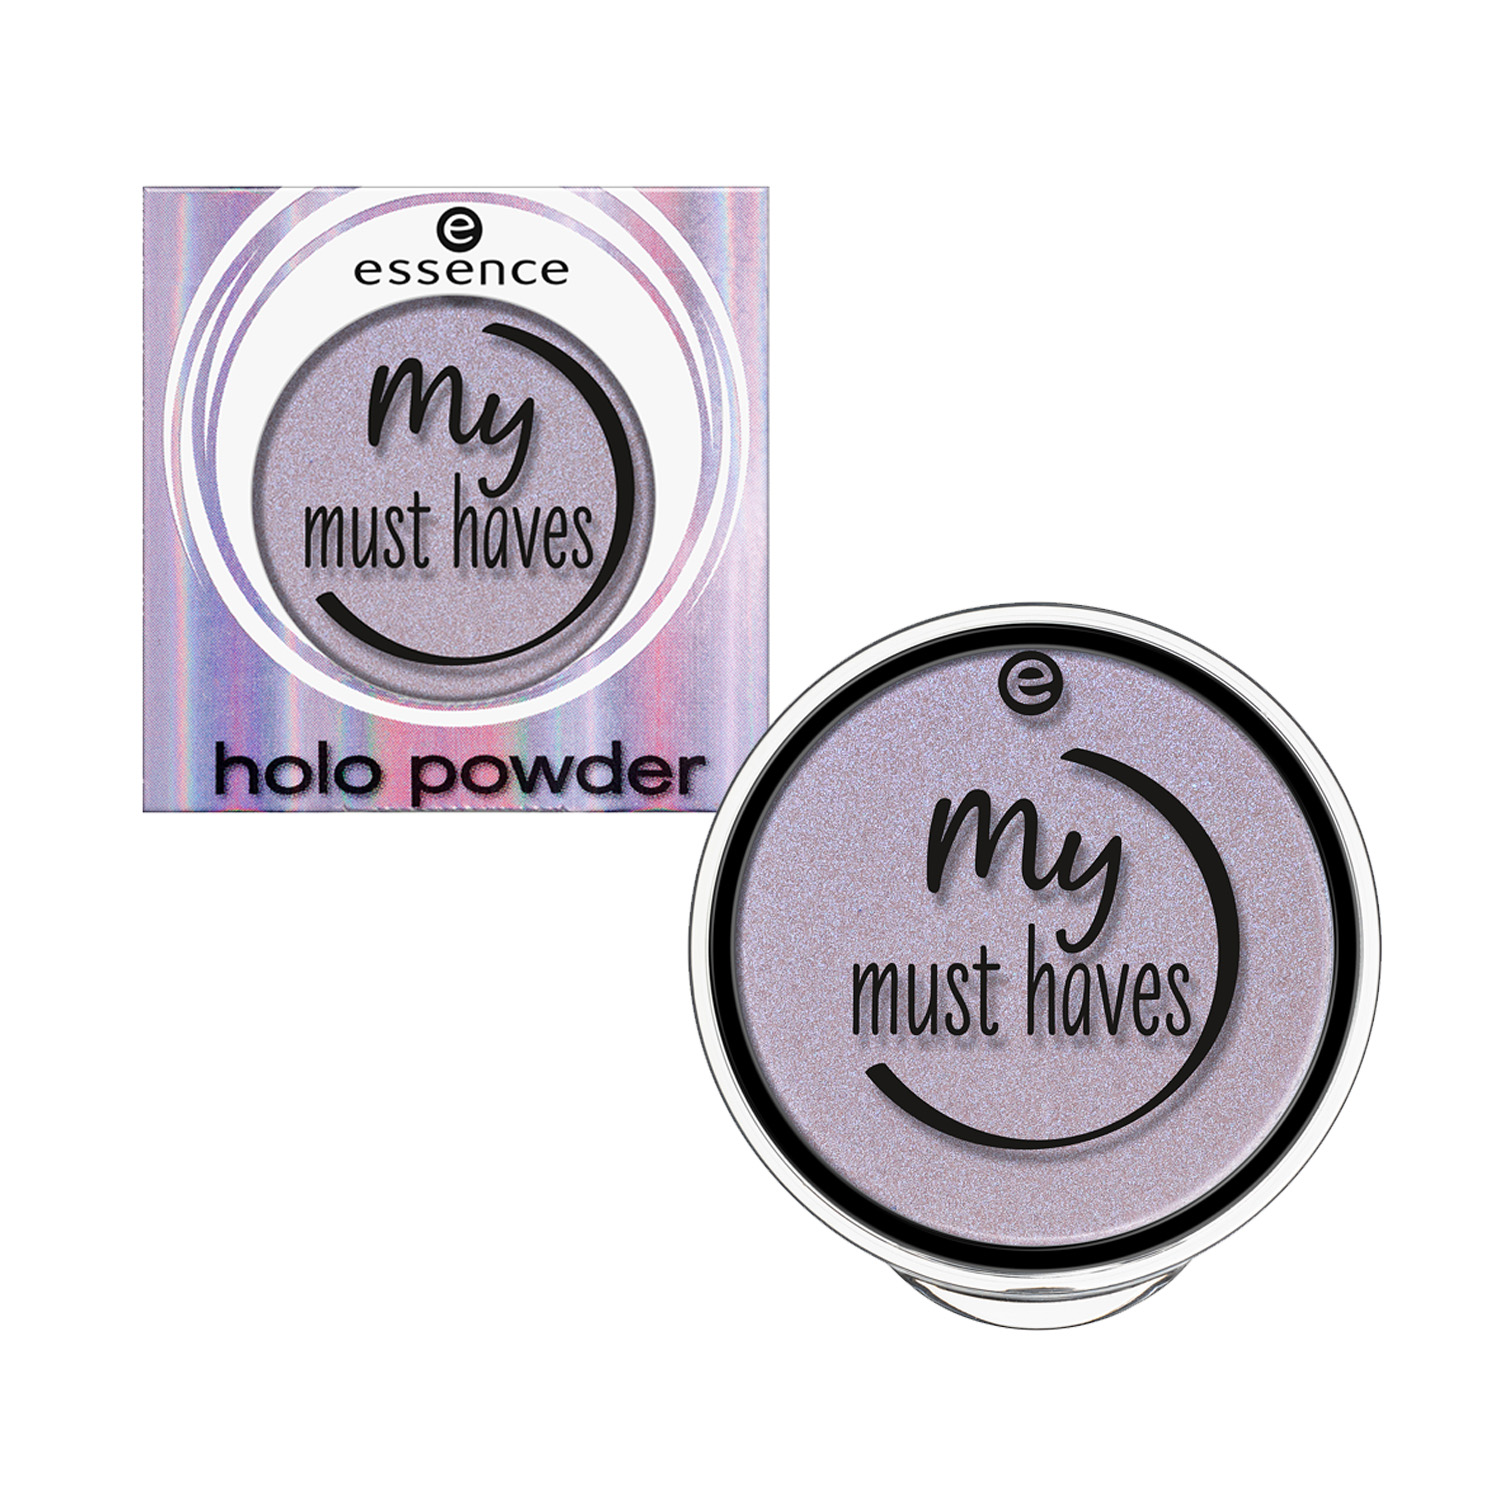 ess.my must haves holo powder 03